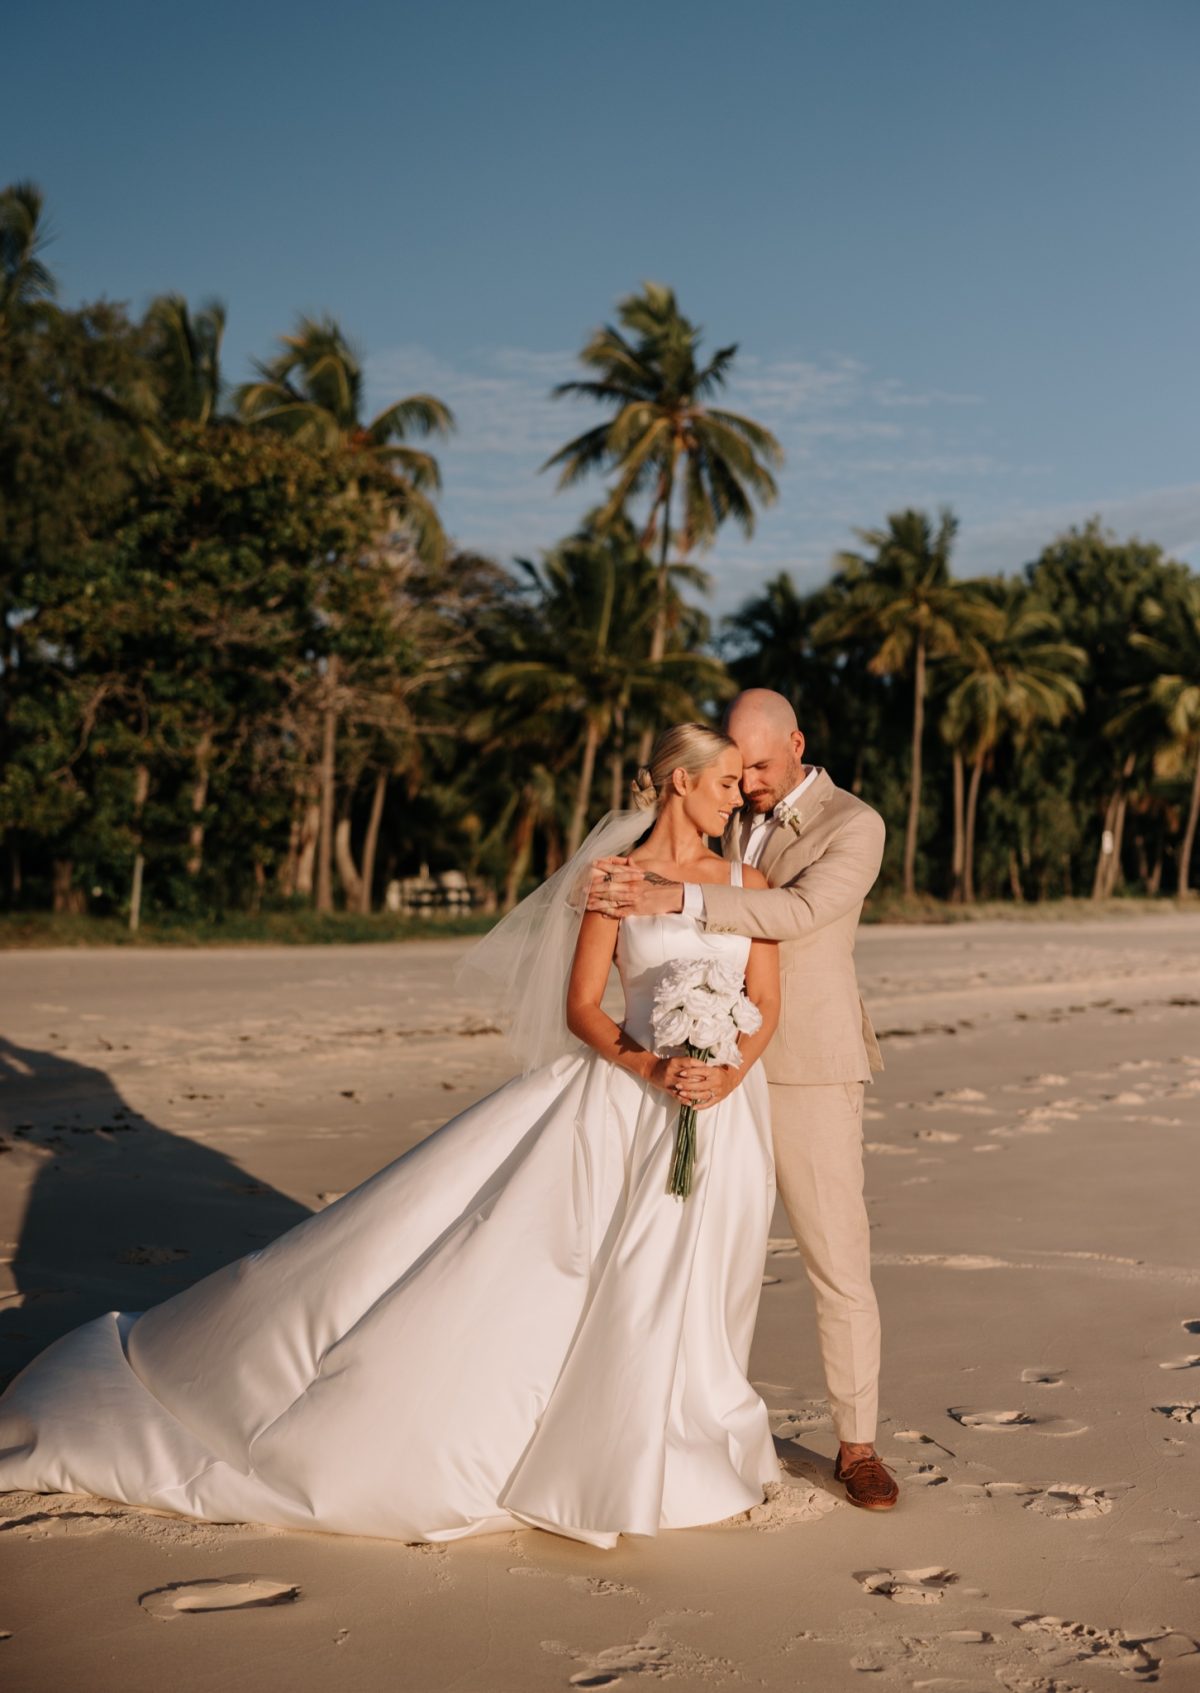 Real-wedding-Brooke-and-Ben-by-Sarah-Lette-Photography-beach-portrait